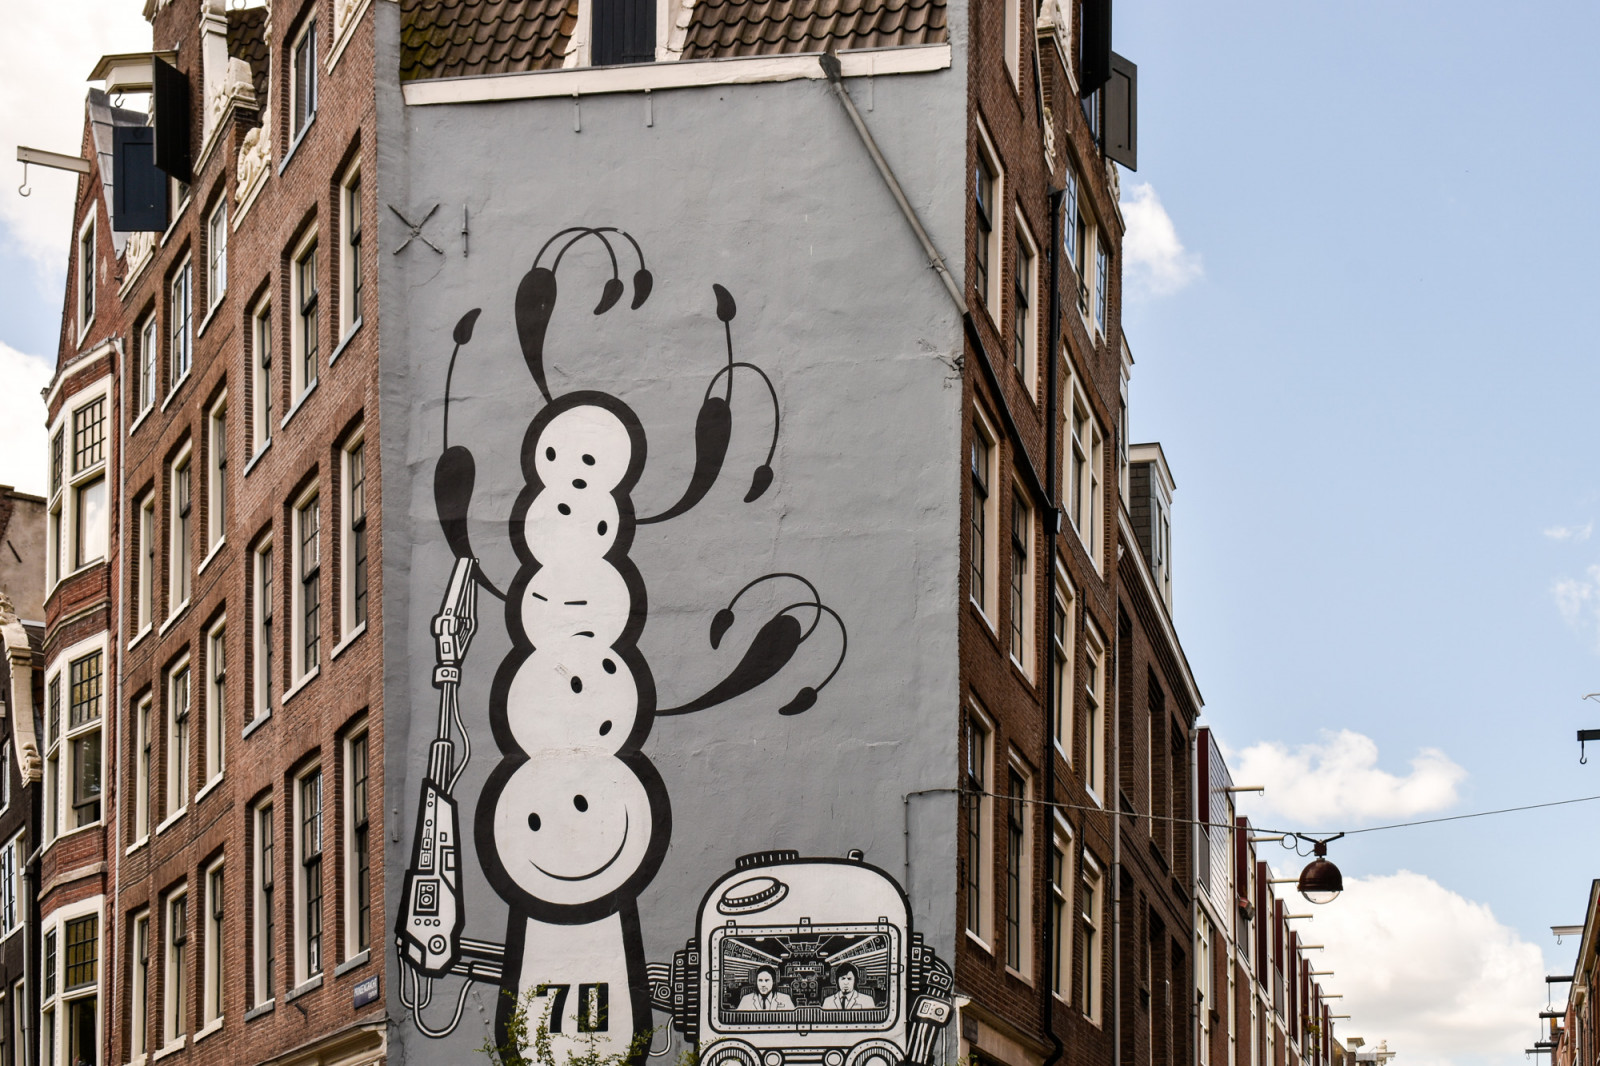 Cool street art on building in Amsterdam 